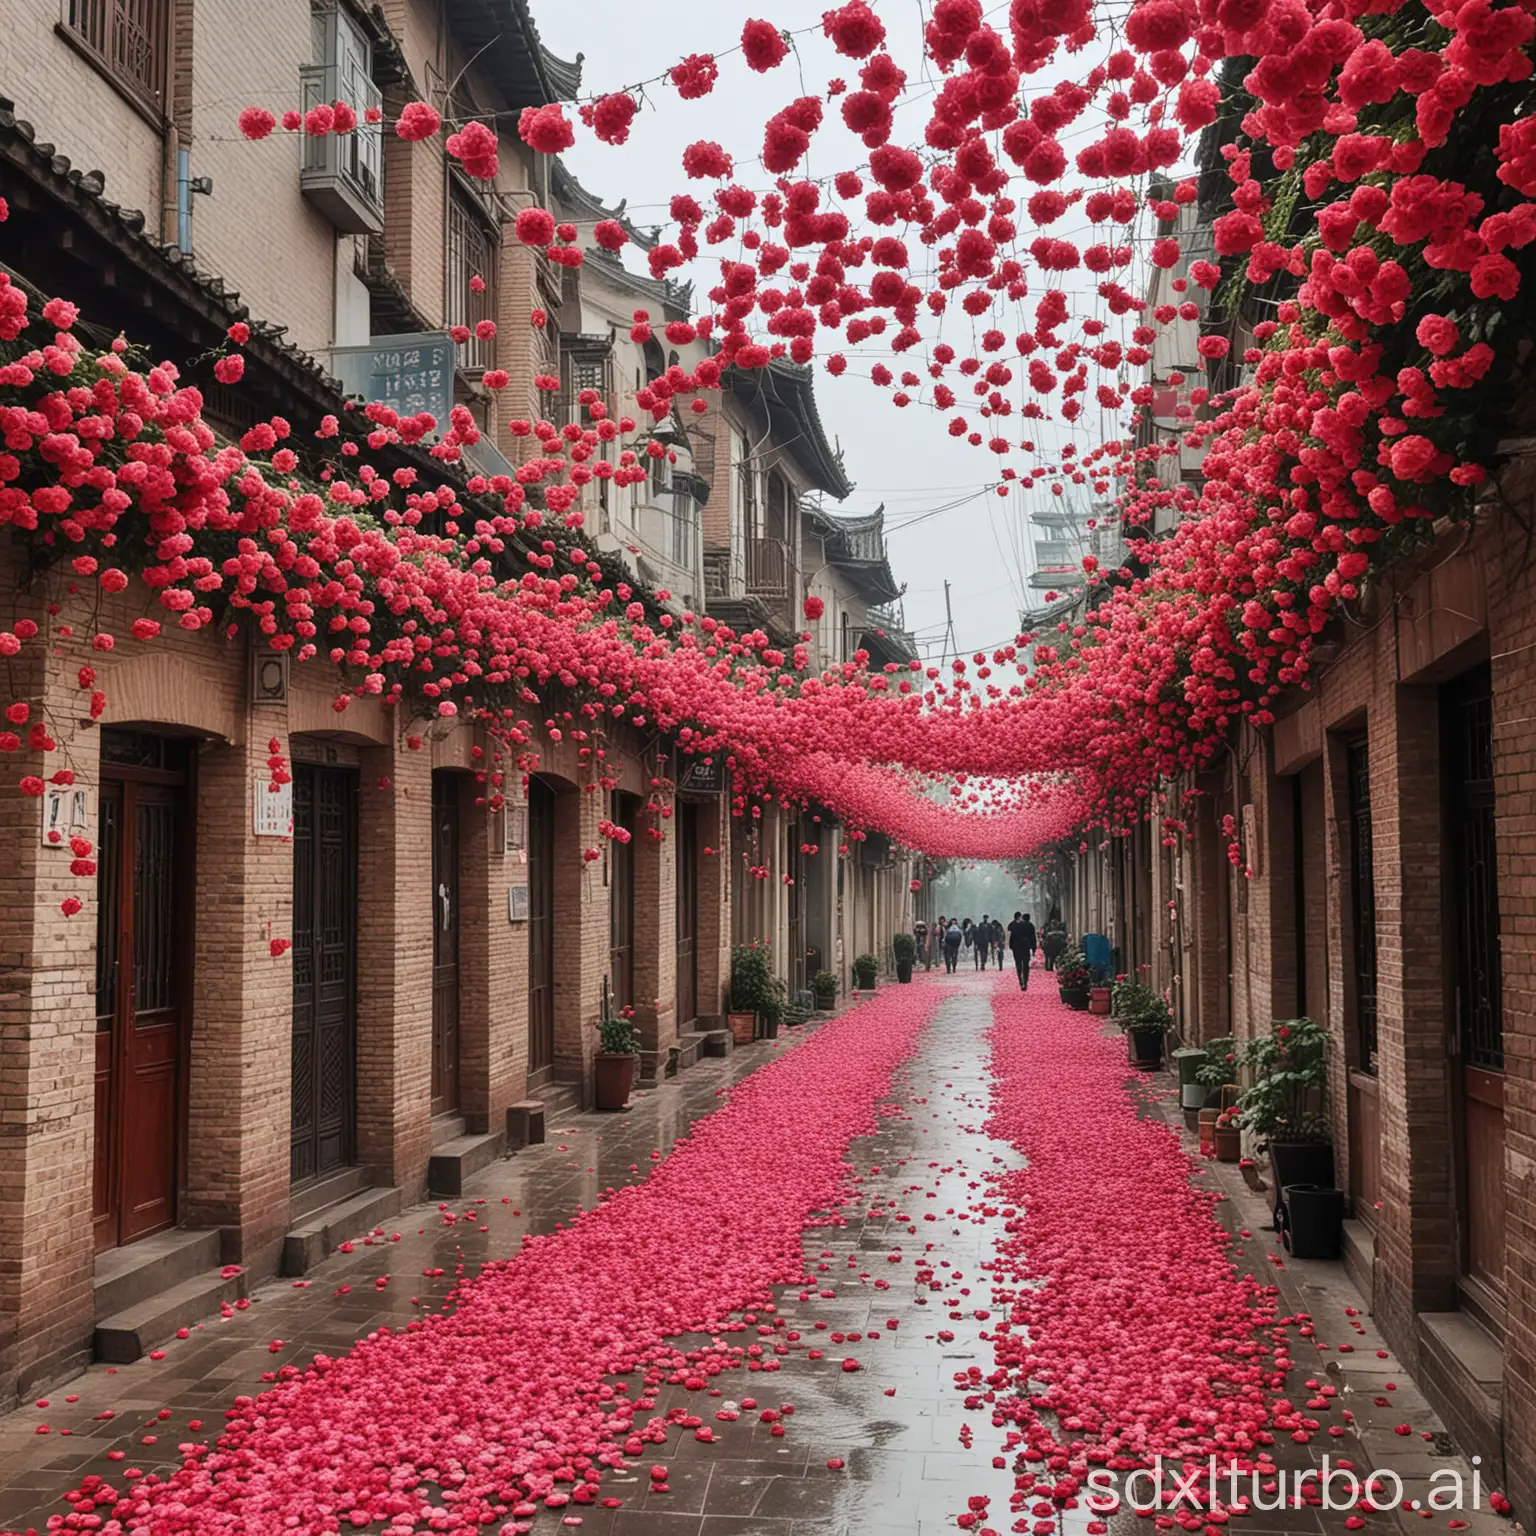 The rose-filled streets of Wuhan